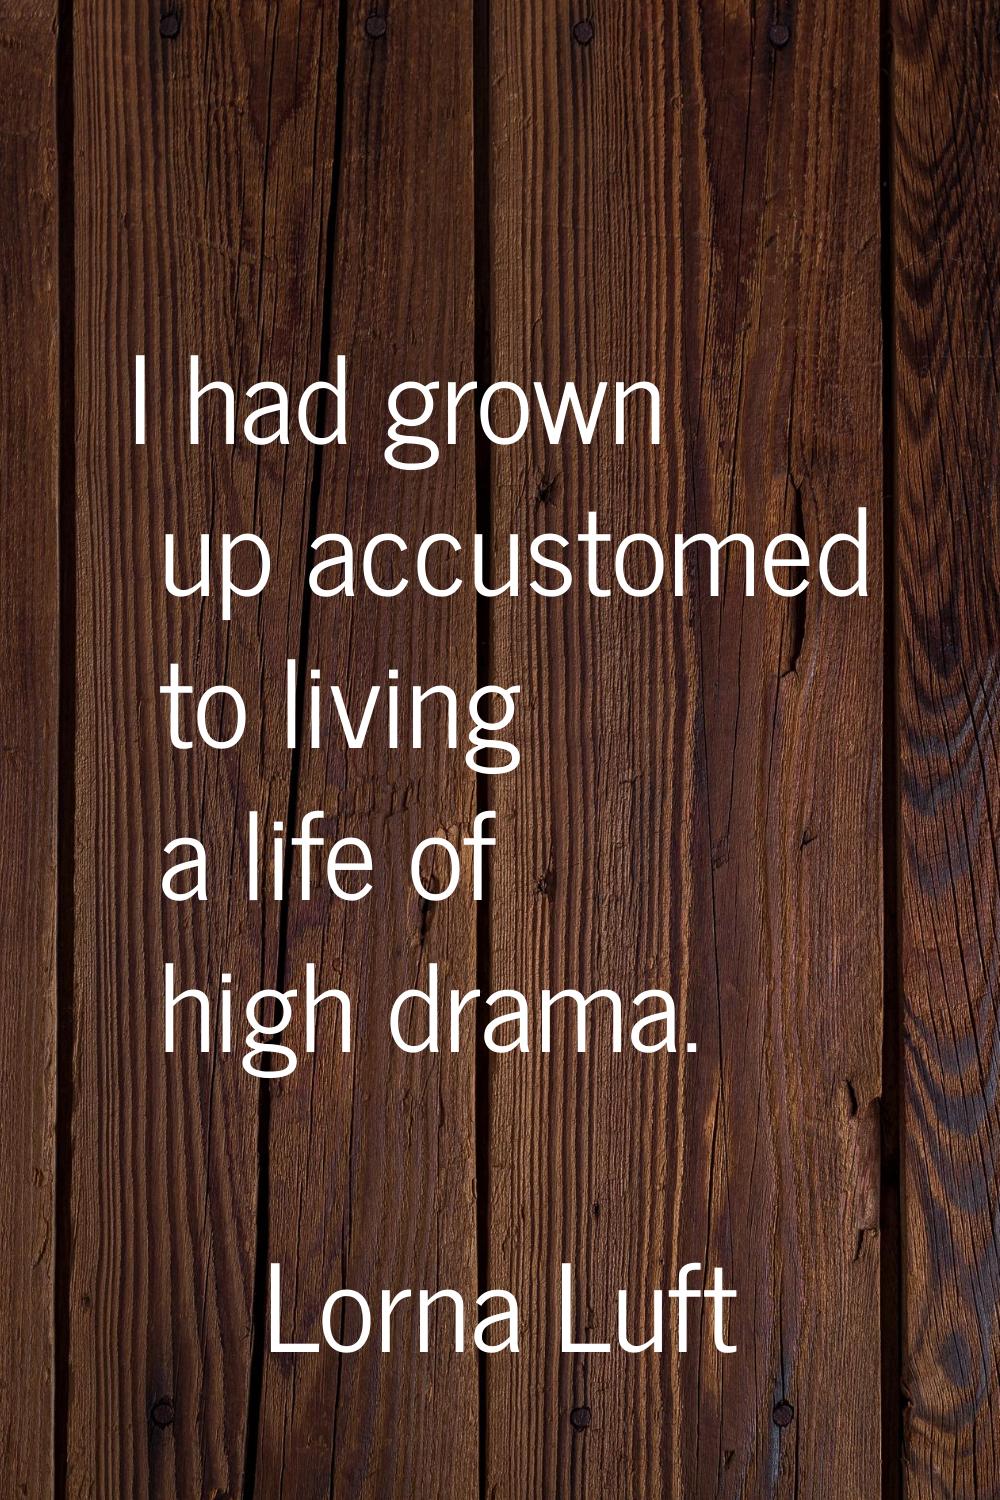 I had grown up accustomed to living a life of high drama.